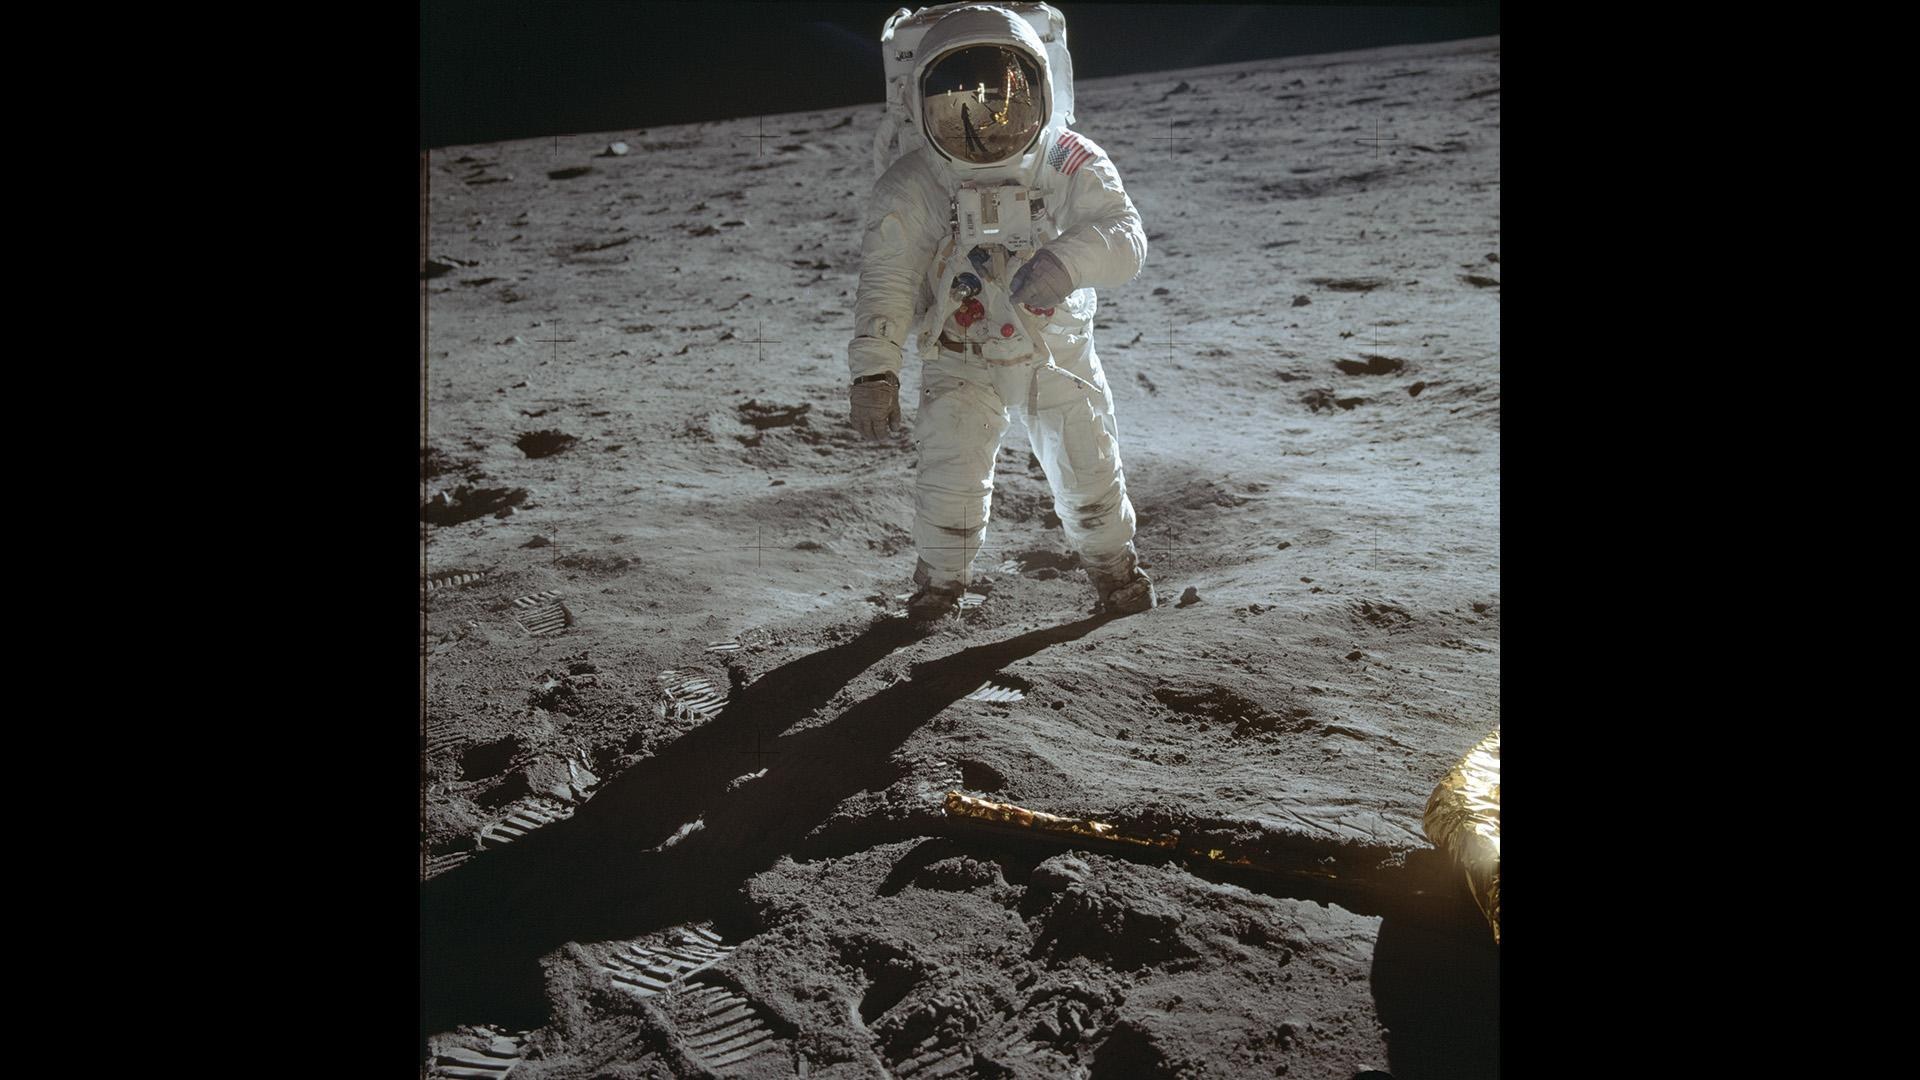 Neil Armstrong, commander of the Apollo 11 mission, stepped onto the surface of the Moon.